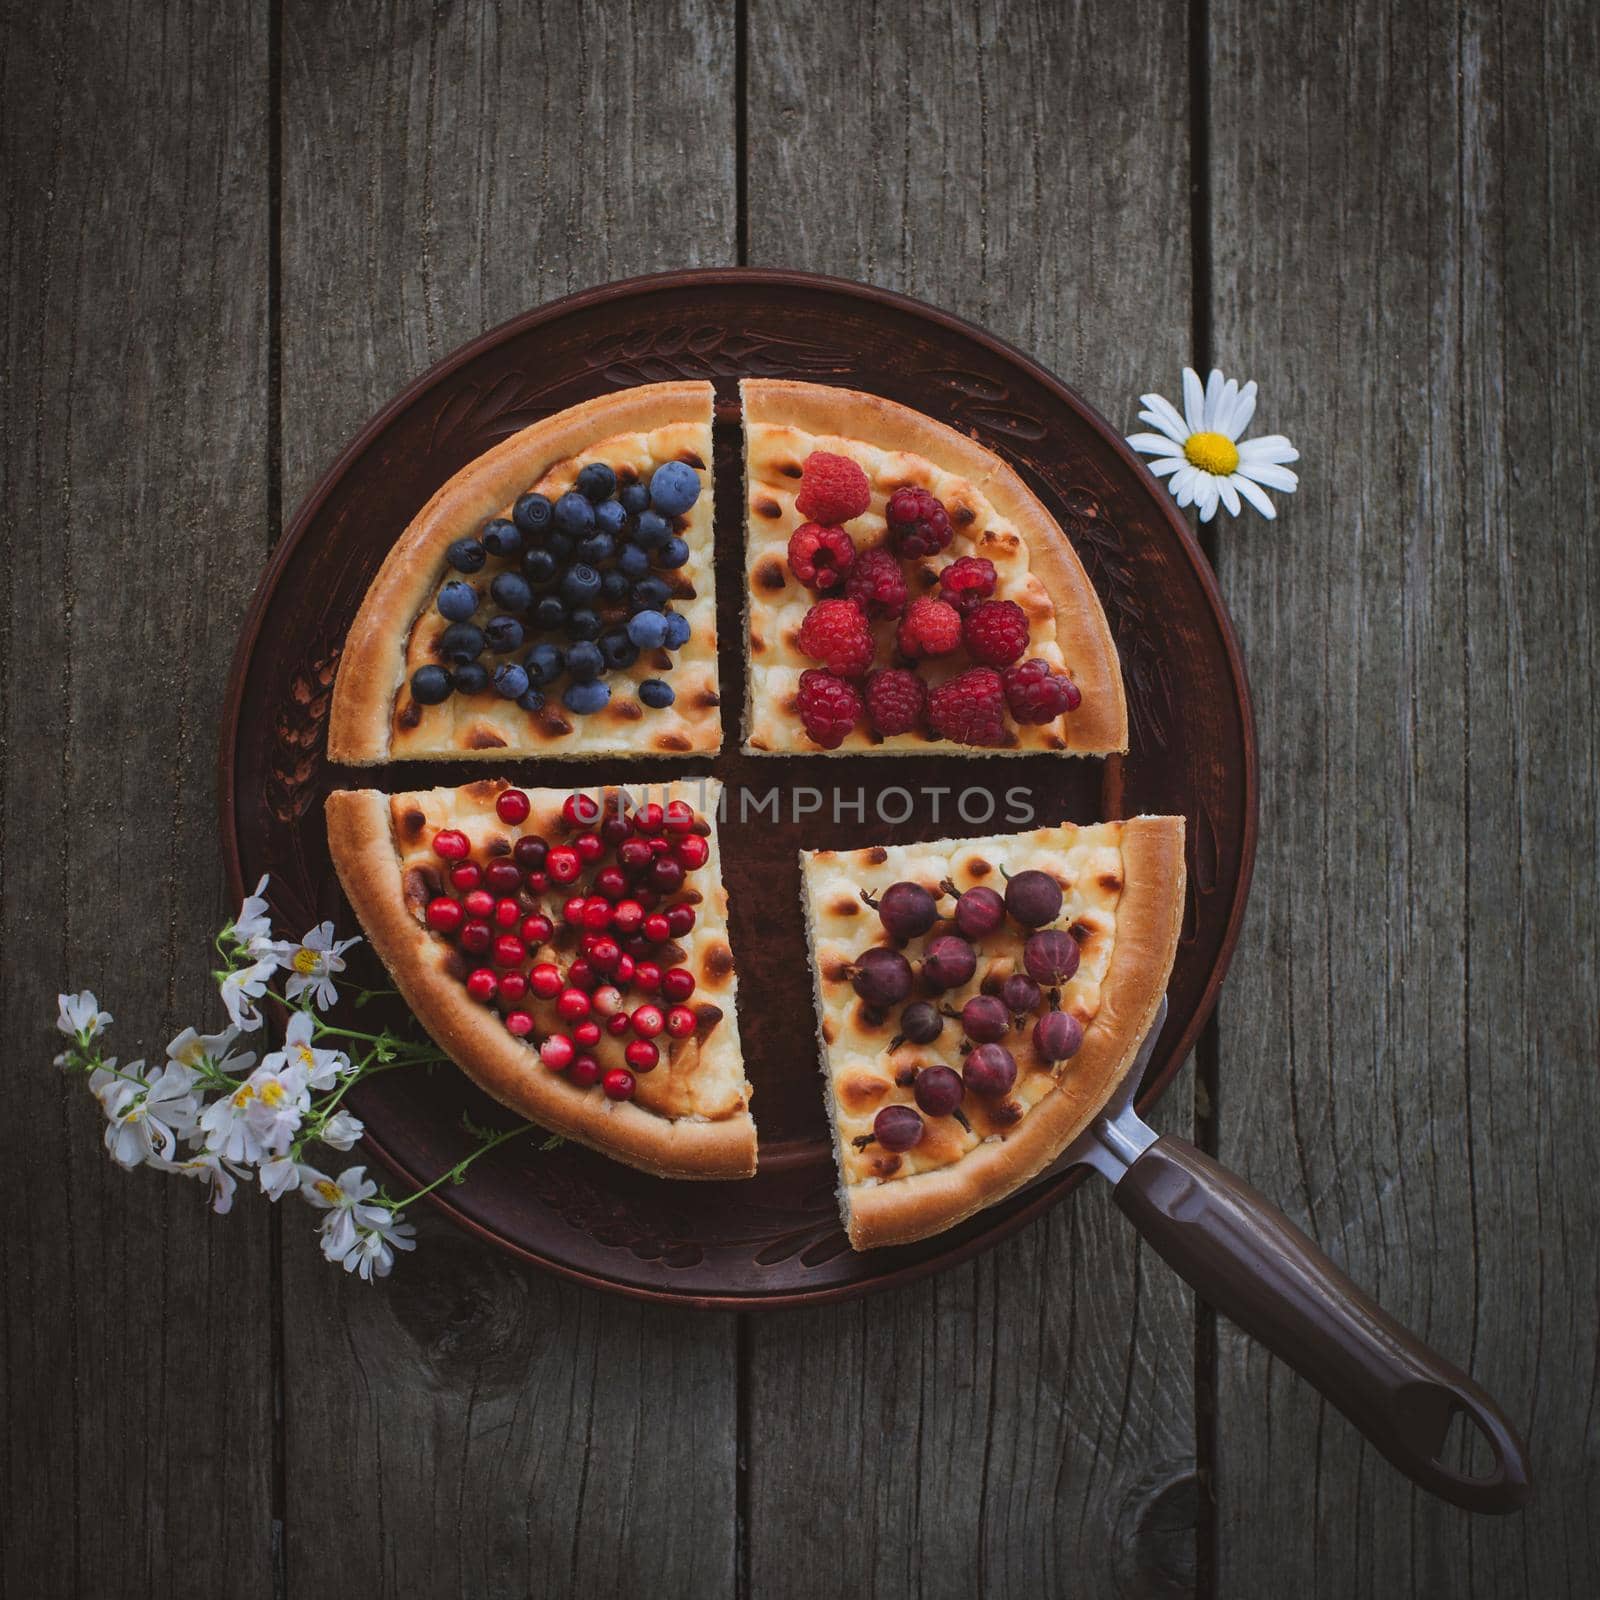 Homemade cheesecake Pie with berries On Wooden Background by RosaJay